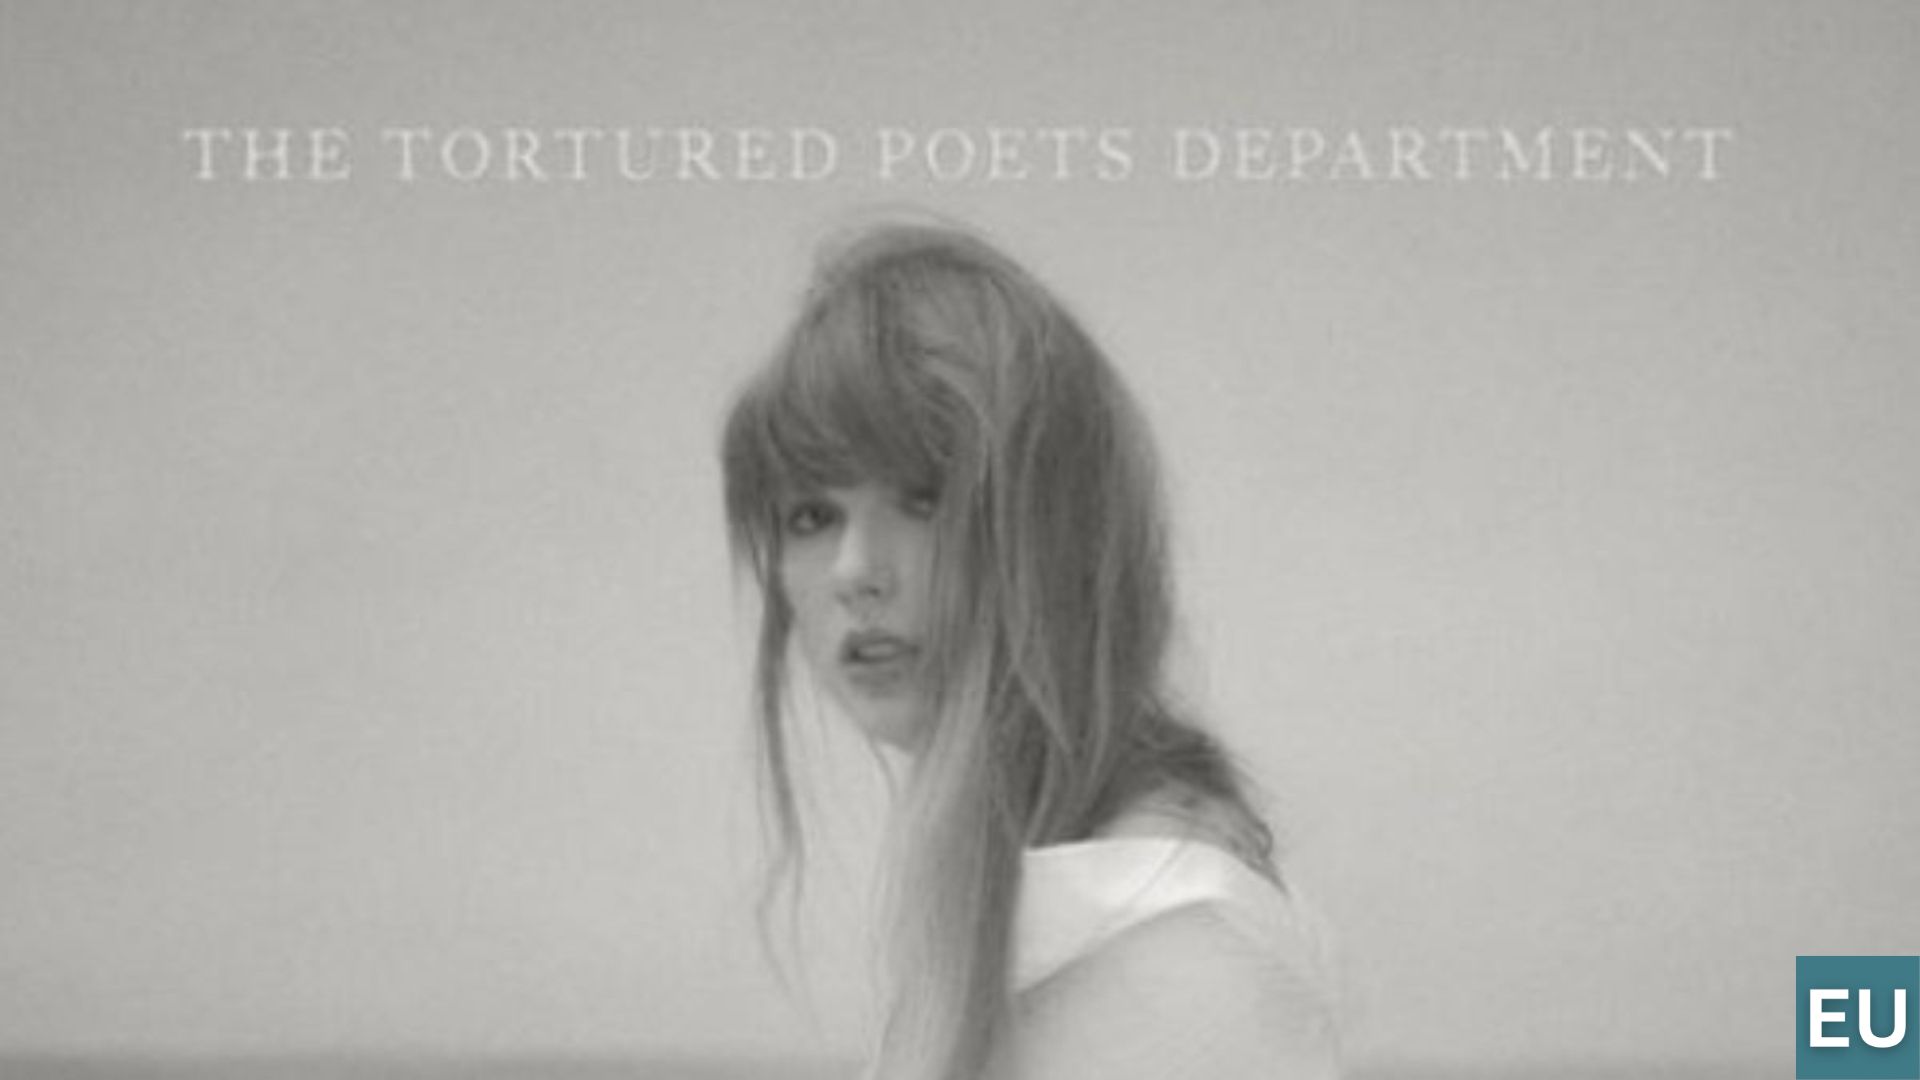 The Tortured Poets Department’, Taylor swift The Tortured Poets Department’, Taylor Swift album The Tortured Poets Department, Taylor Swift Album, Taylor Swift New Album, Taylor Swift, TSTTPD, TSTTPD Poster